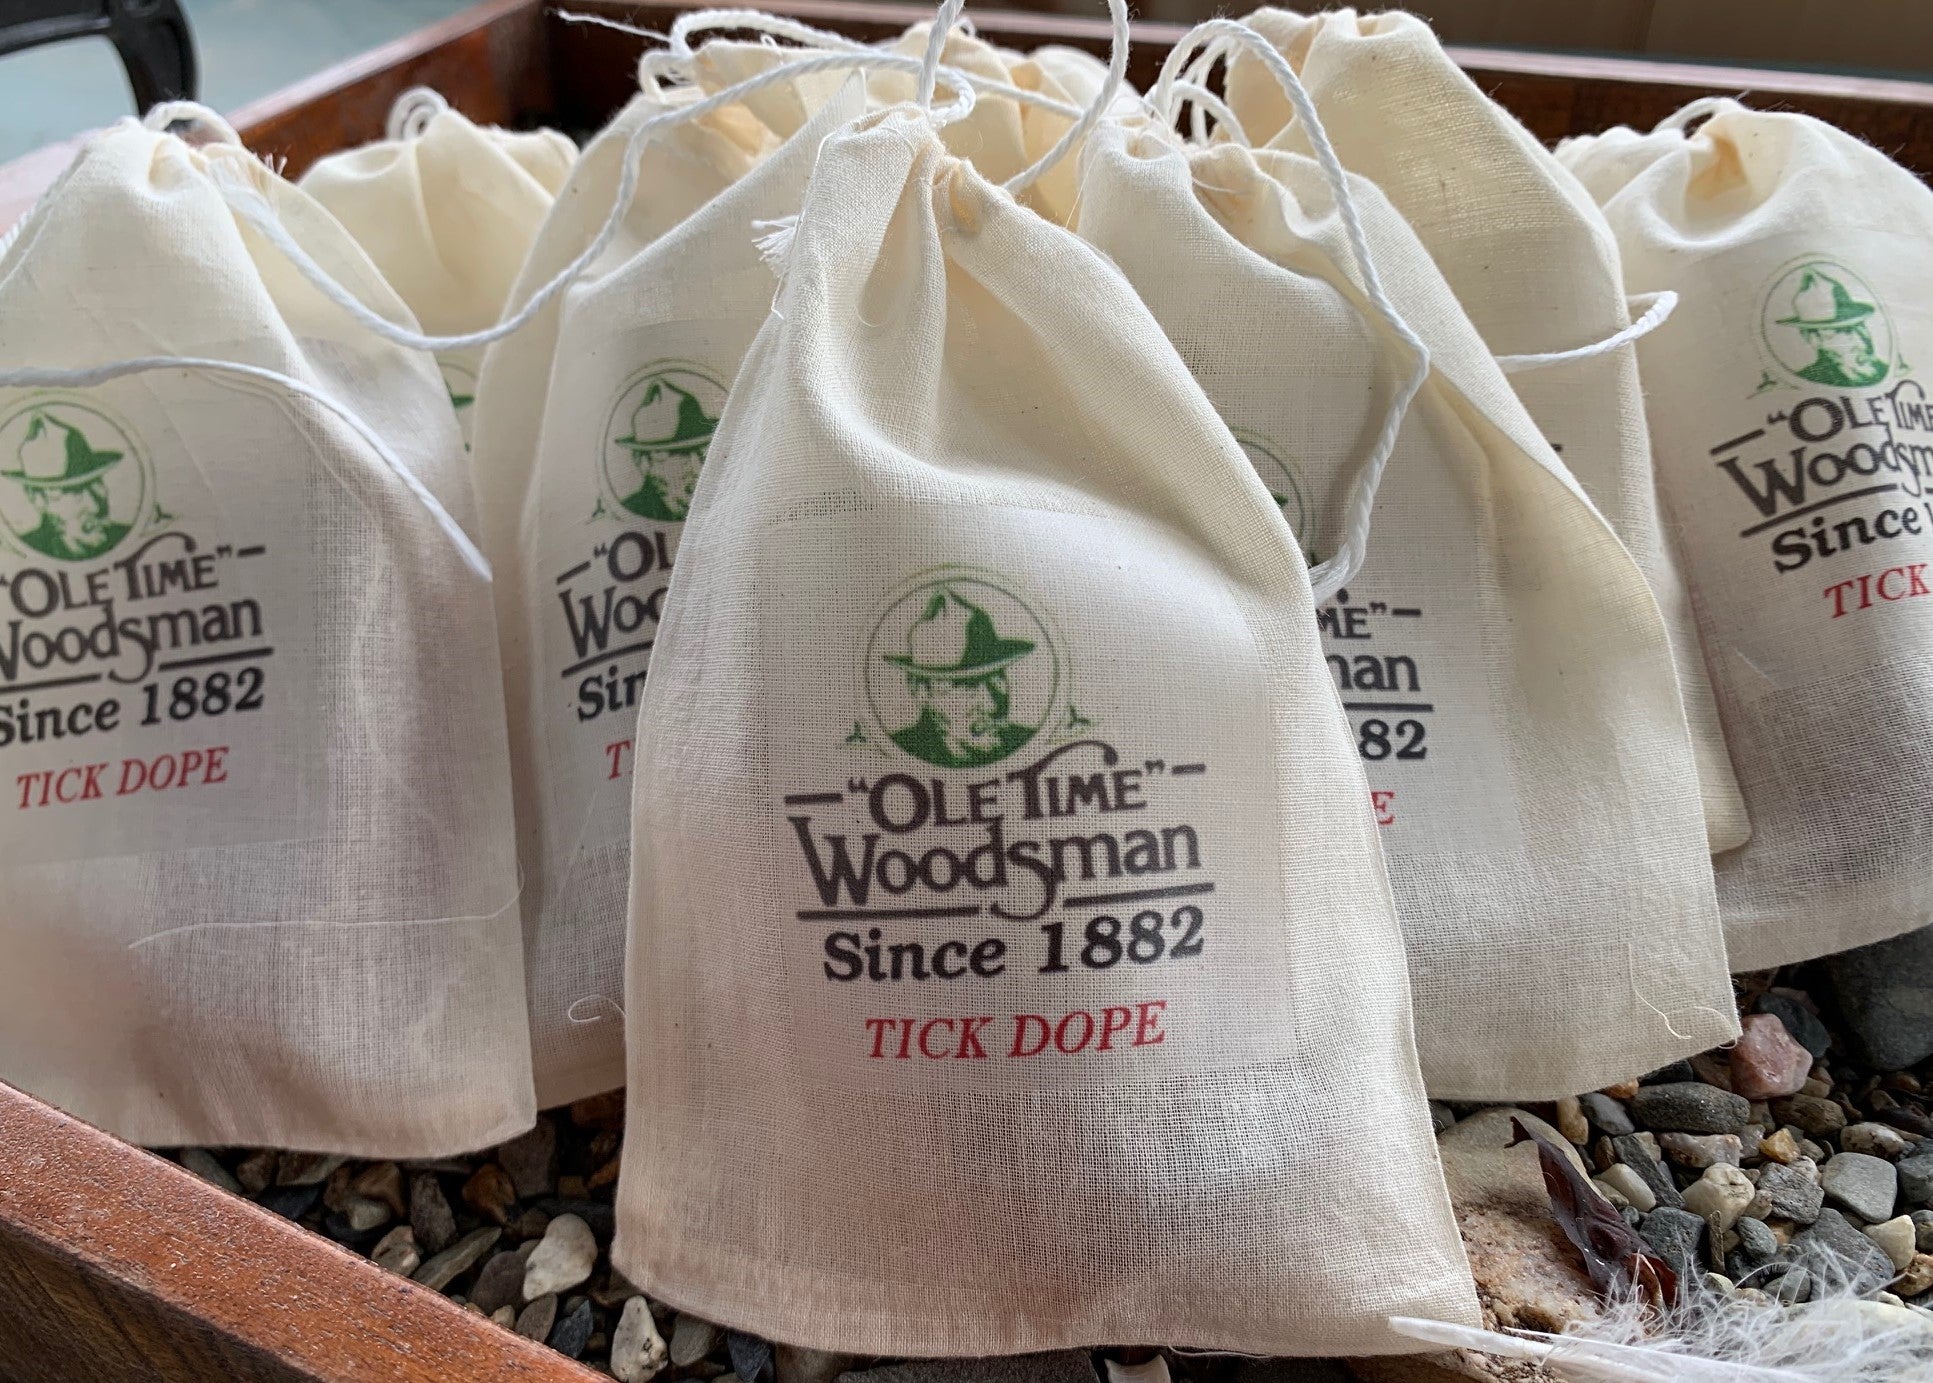 Ole Time Woodsmann Tick Dope (Economy 12 Pack) (Free Shipping in USA) - Ole Time Woodsman